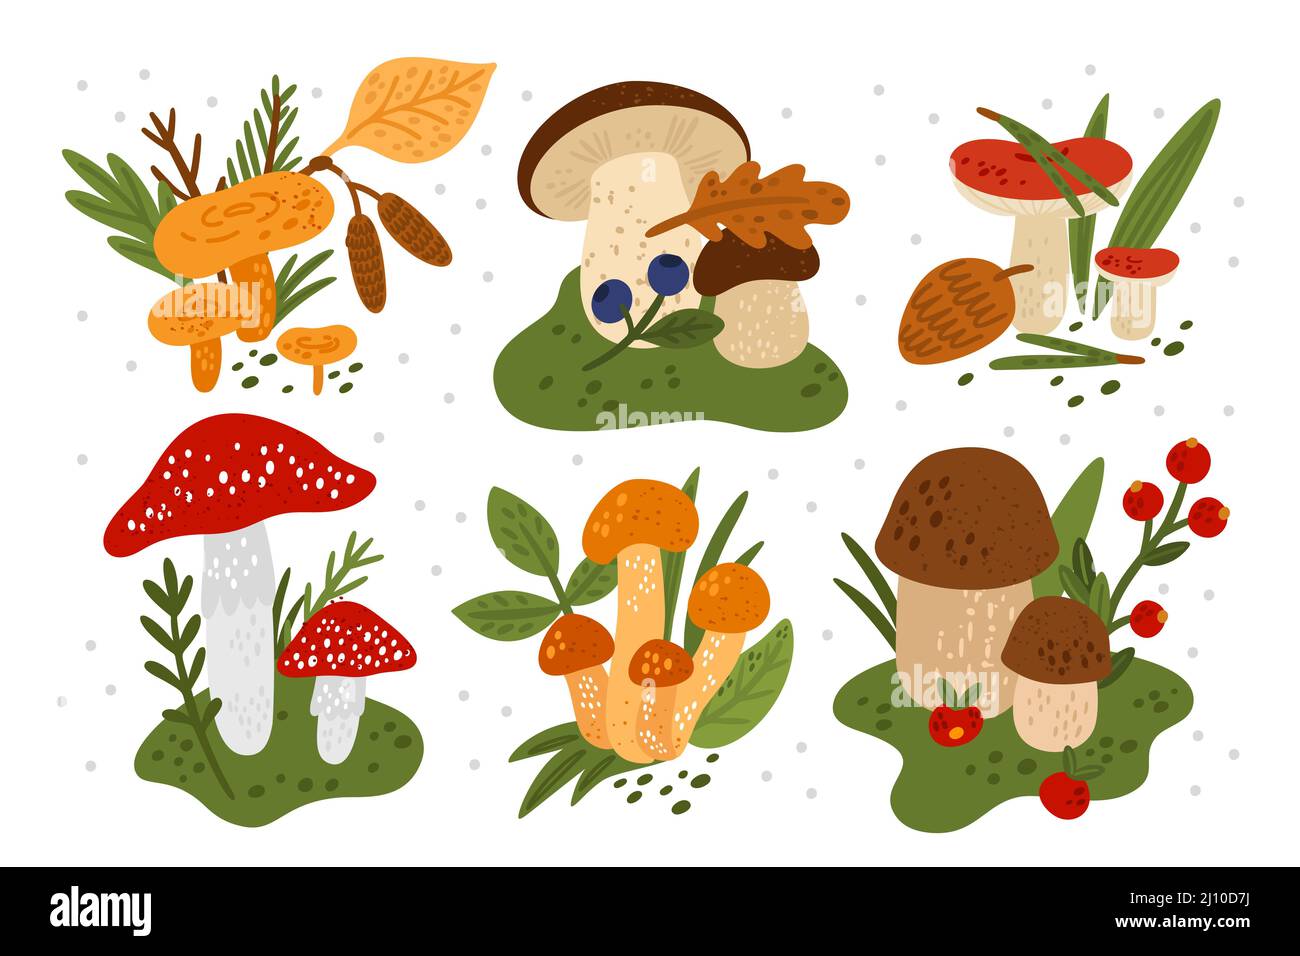 Mushrooms compositions. Forest fungi with plants. Berries and leaves on russula cap. Woodland porcini. Fly agaric and honeydew. Edible and poisonous Stock Vector